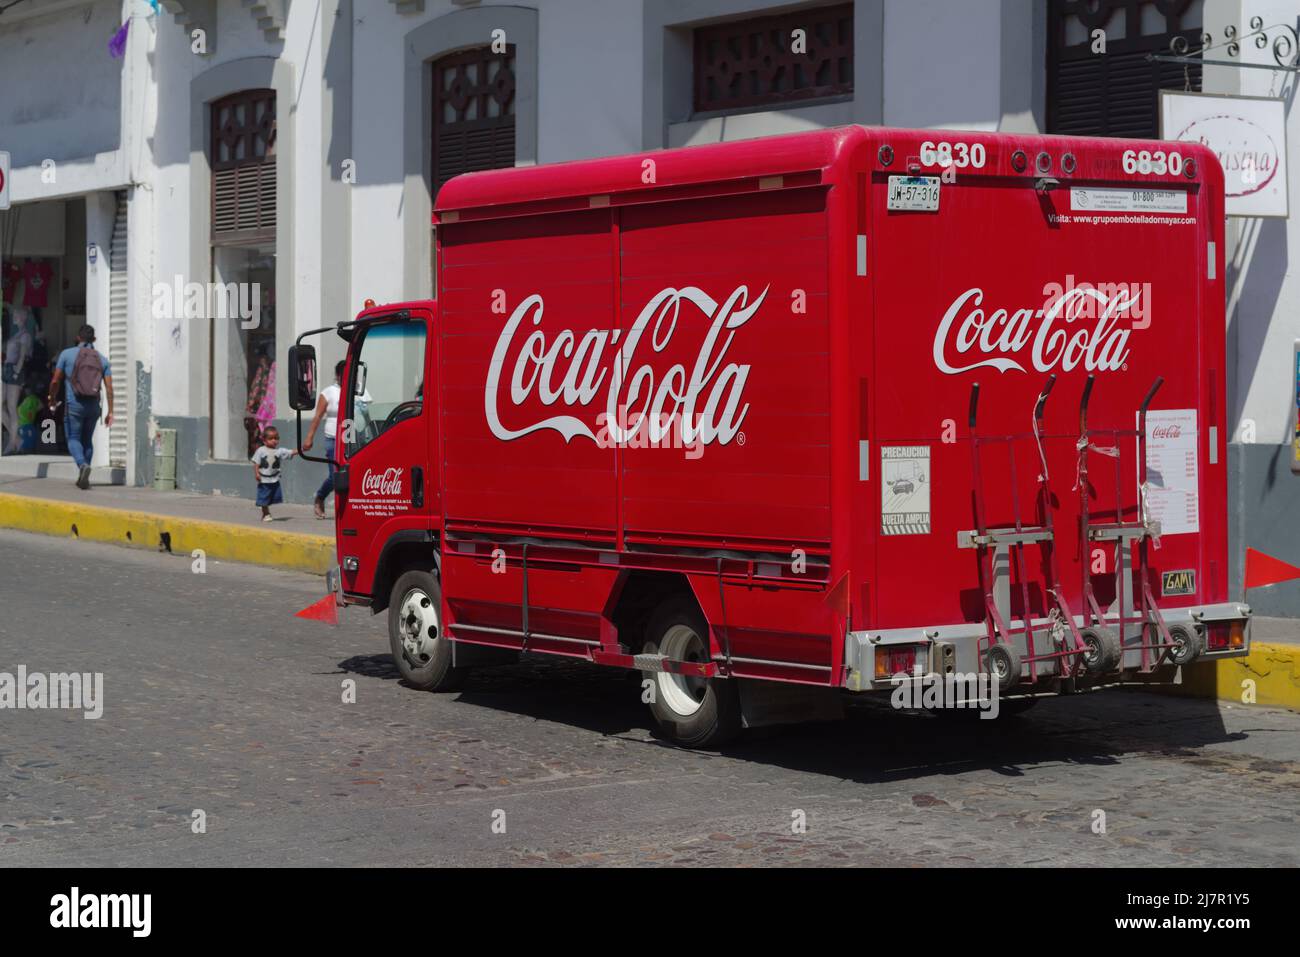 Image of a Coca Cola delivery truck shown driving in the town of Puerto Vallarta. Stock Photo